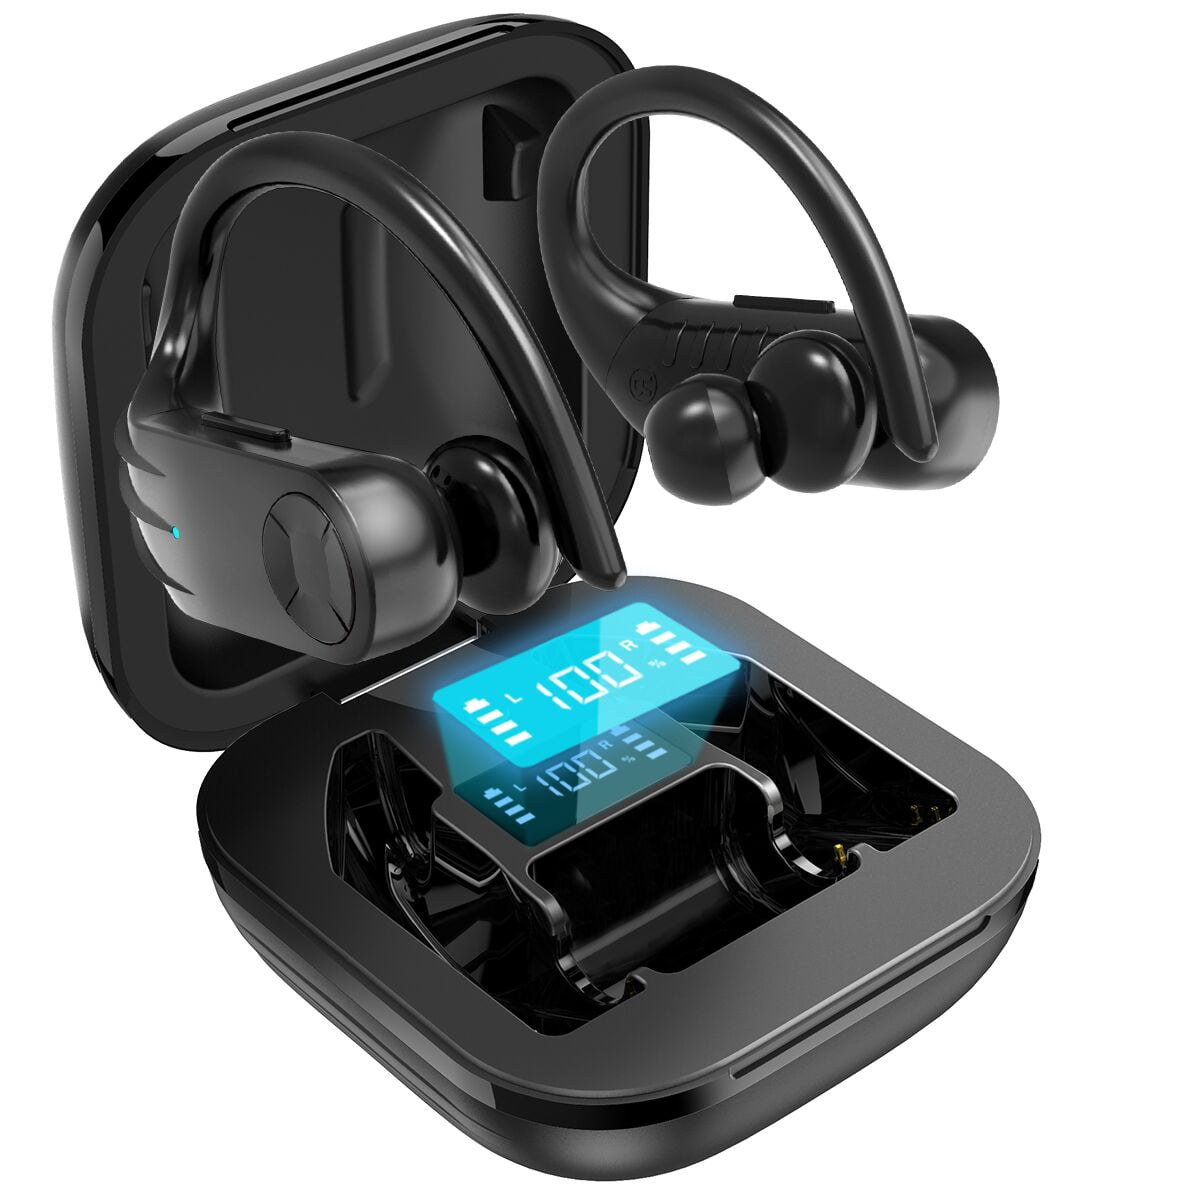 Pop-Up Auto Pairing Bluetooth Earphones iPhone/Android/Samsung in Ear Earbuds Wireless Earphone Wireless Earbuds Headphones Bluetooth 5.0 Ear buds with Mic Smart Noise Reduction Fast Charging Case